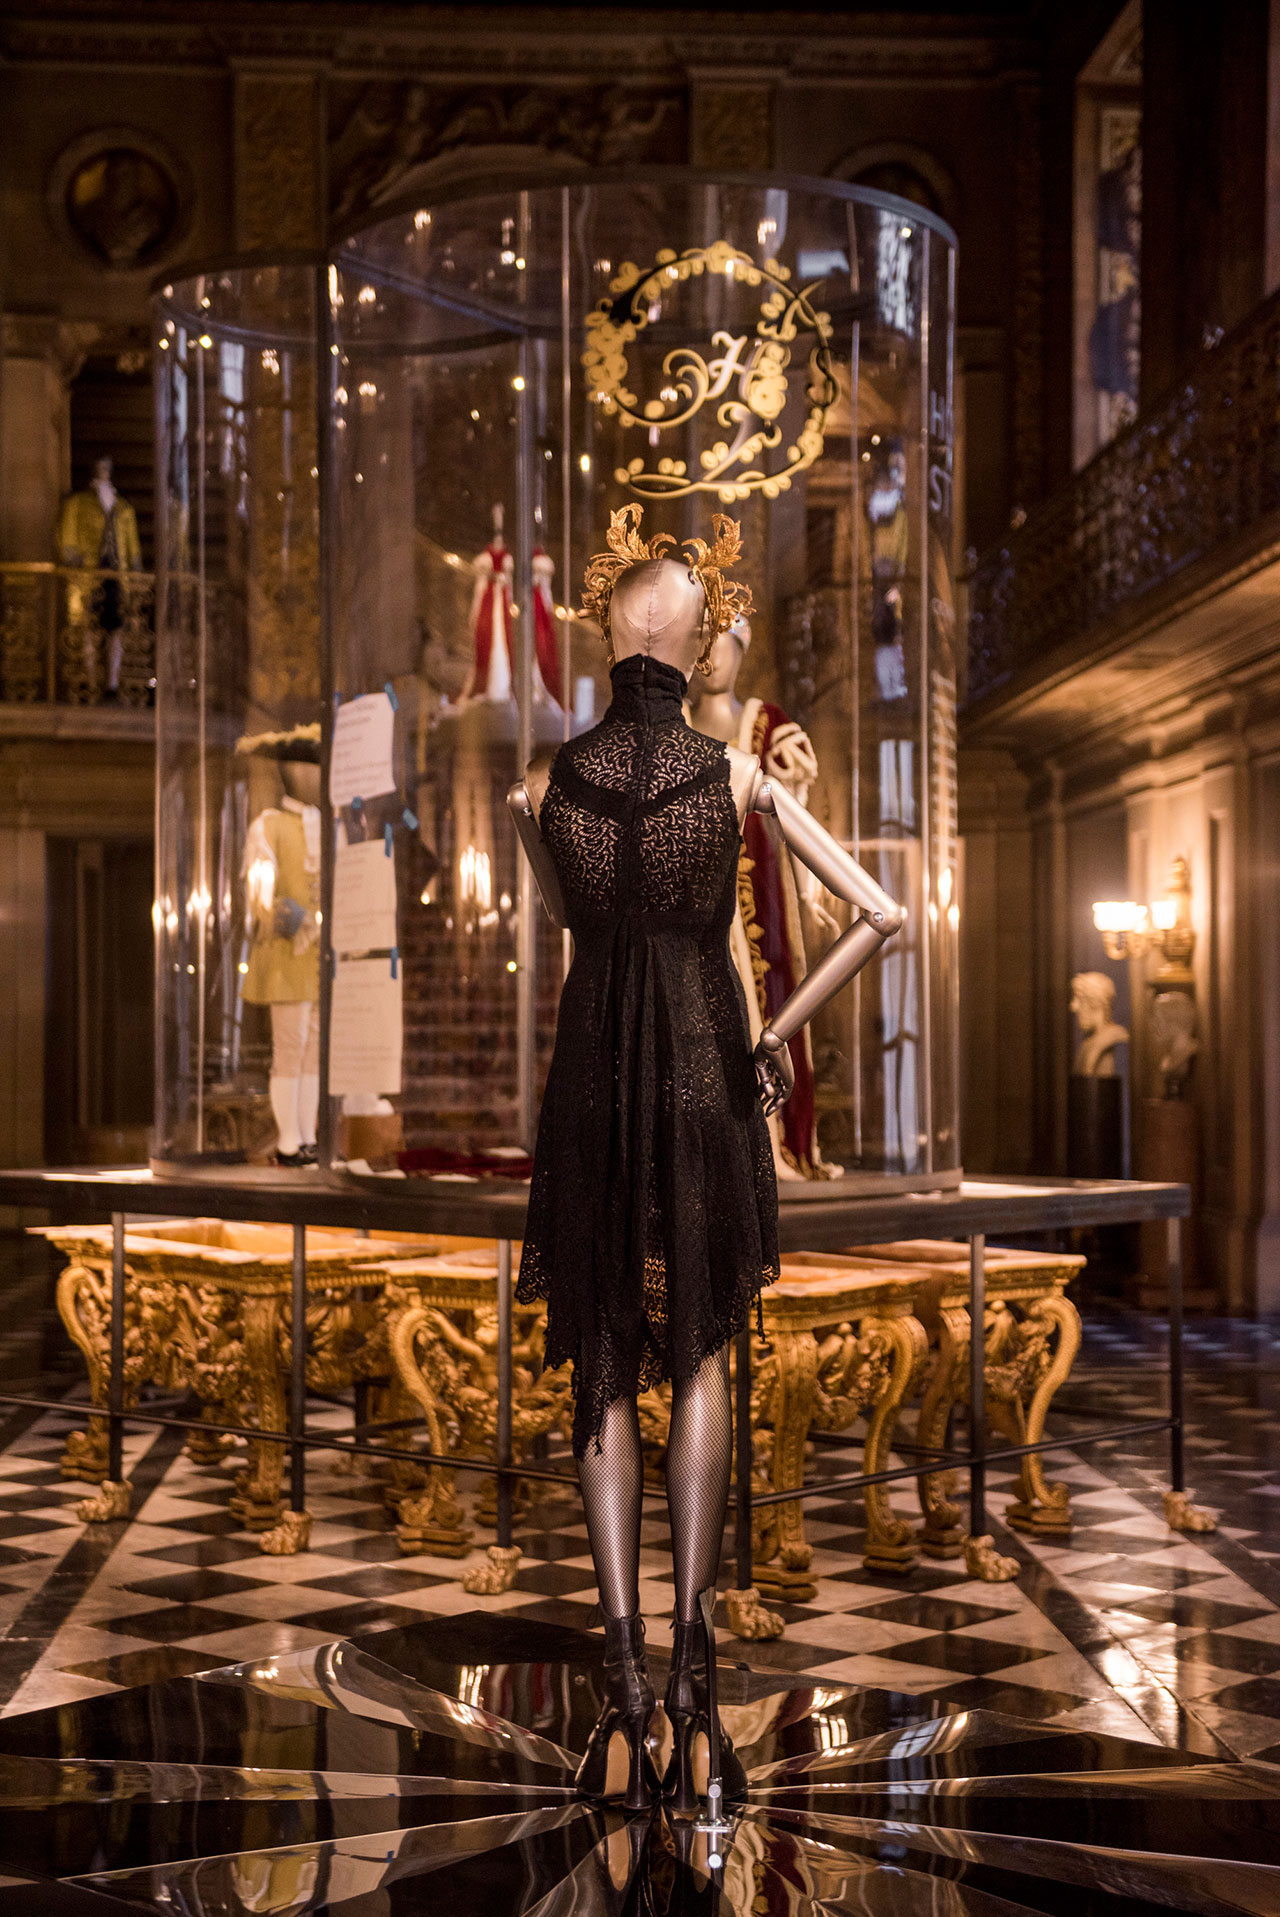 Alexander McQueen dress worn loaned by Stella Tennant, model and the Duke's niece to Chatsworth House Style. Photo courtesy Chatsworth House Trust.